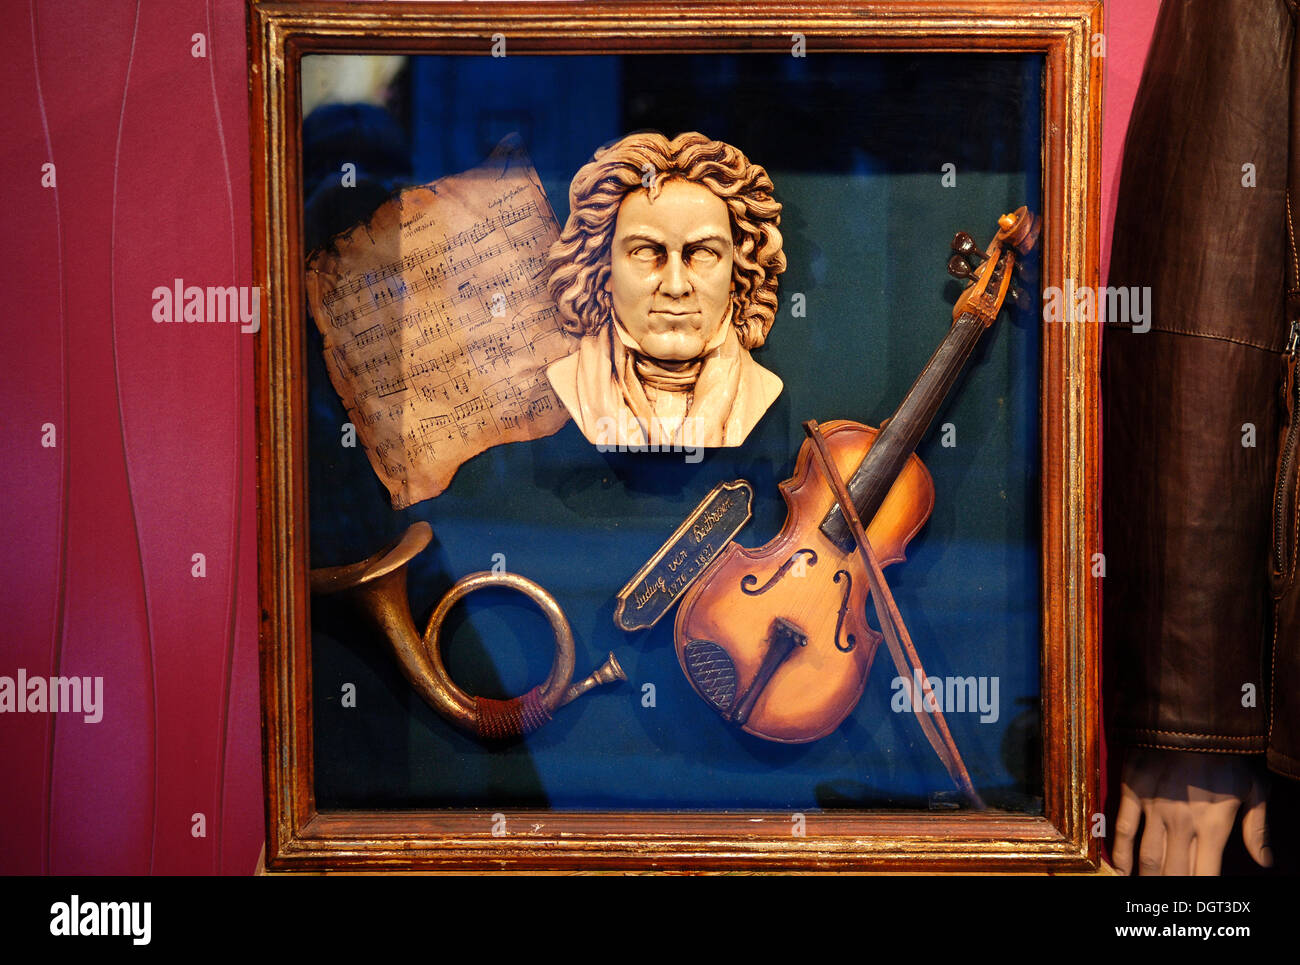 Bust of Beethoven and instruments in a golden frame, Bruges, Belgium, Europe Stock Photo